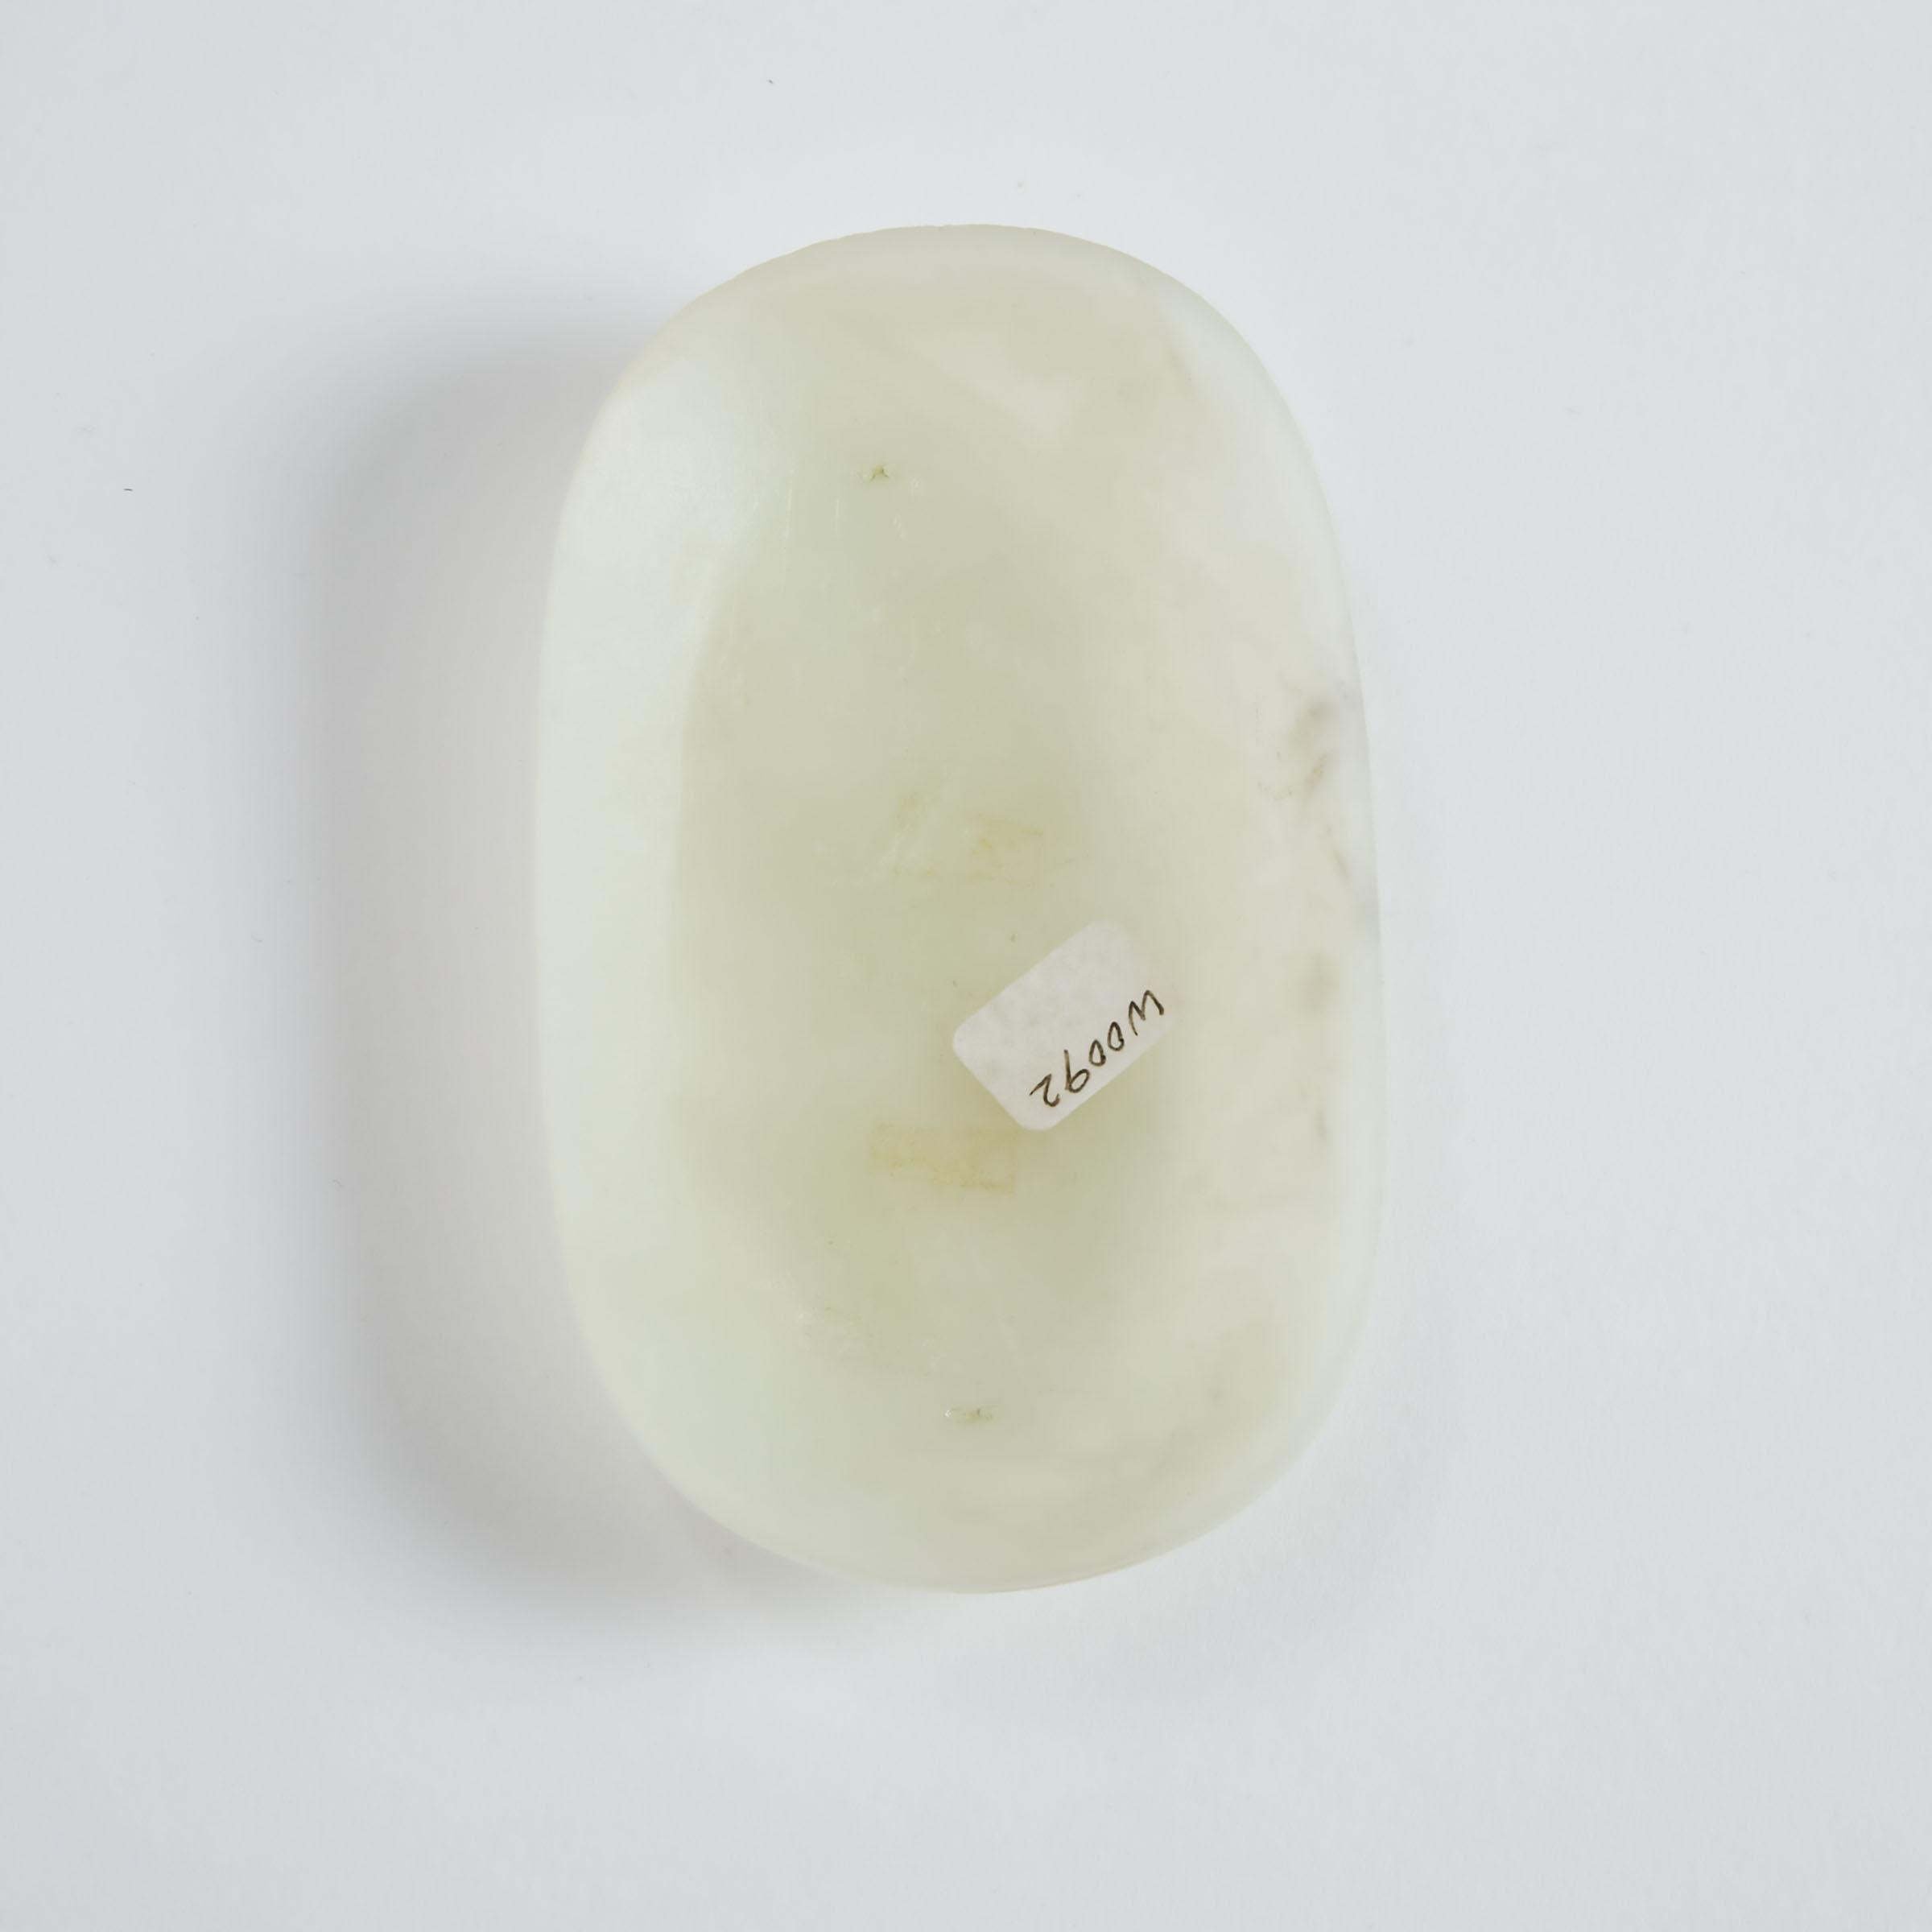 A White Jade 'Figural Landscape' Oval Plaque, Qing Dynasty, 18th/19th Century